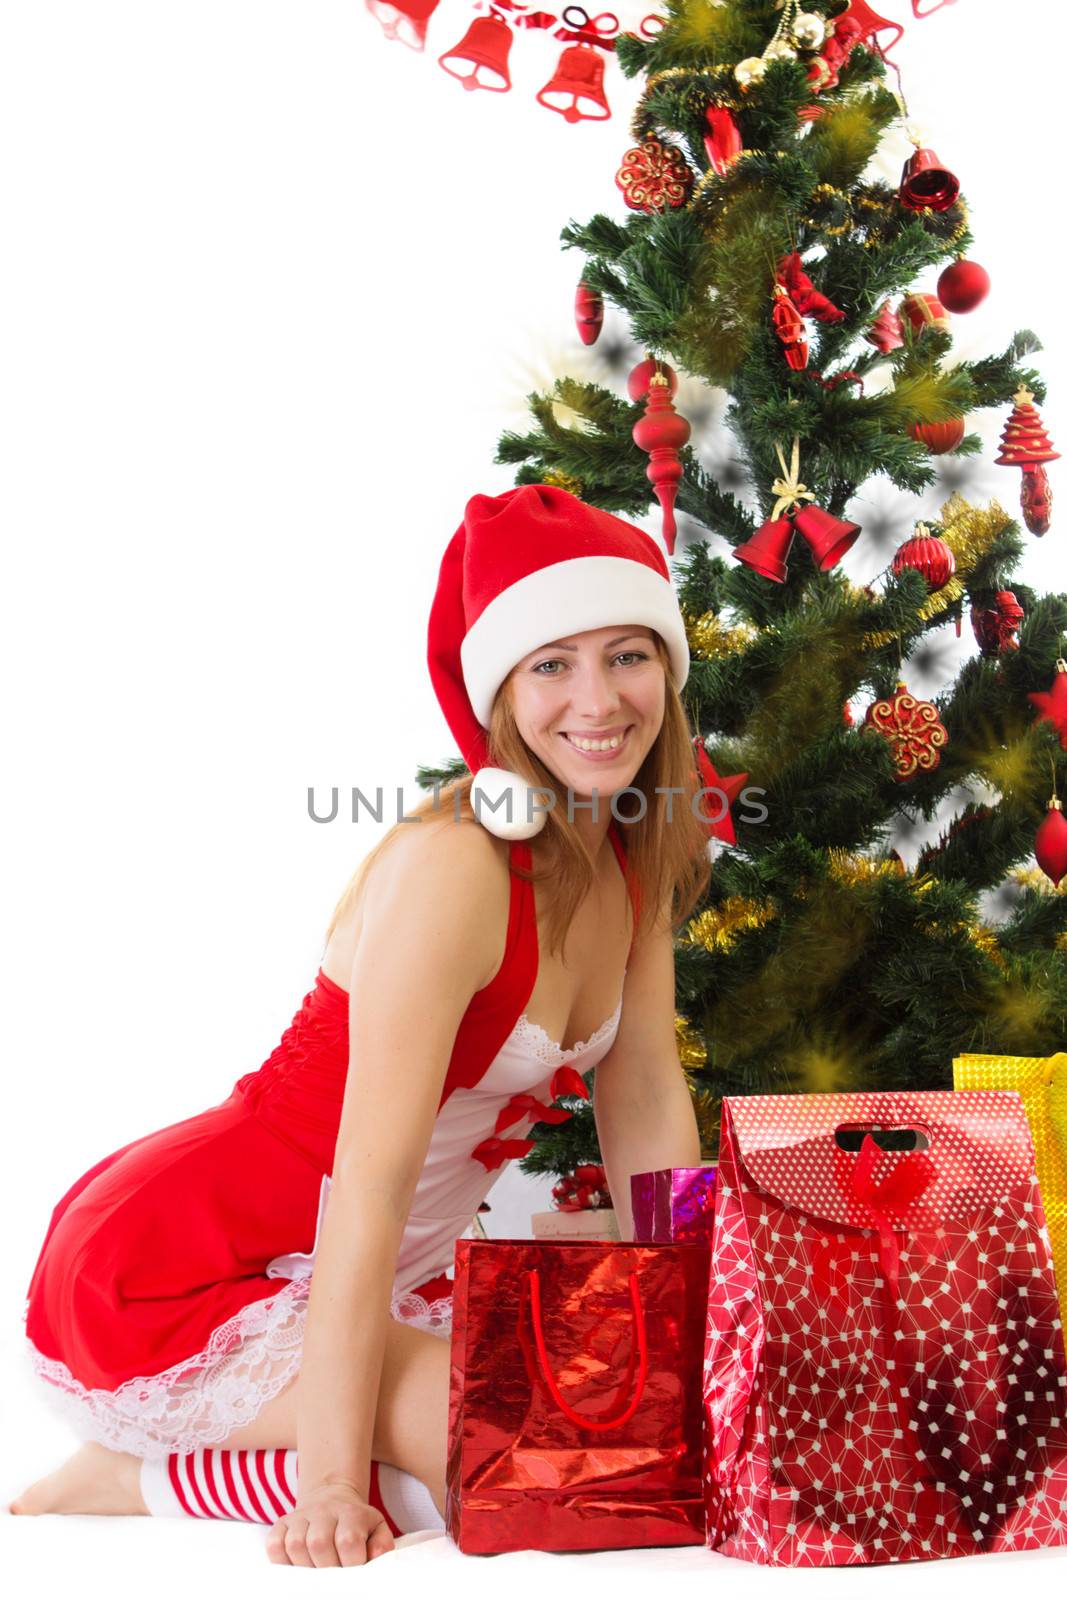 Woman in red sitting under Christmas tree with gifts by Angel_a